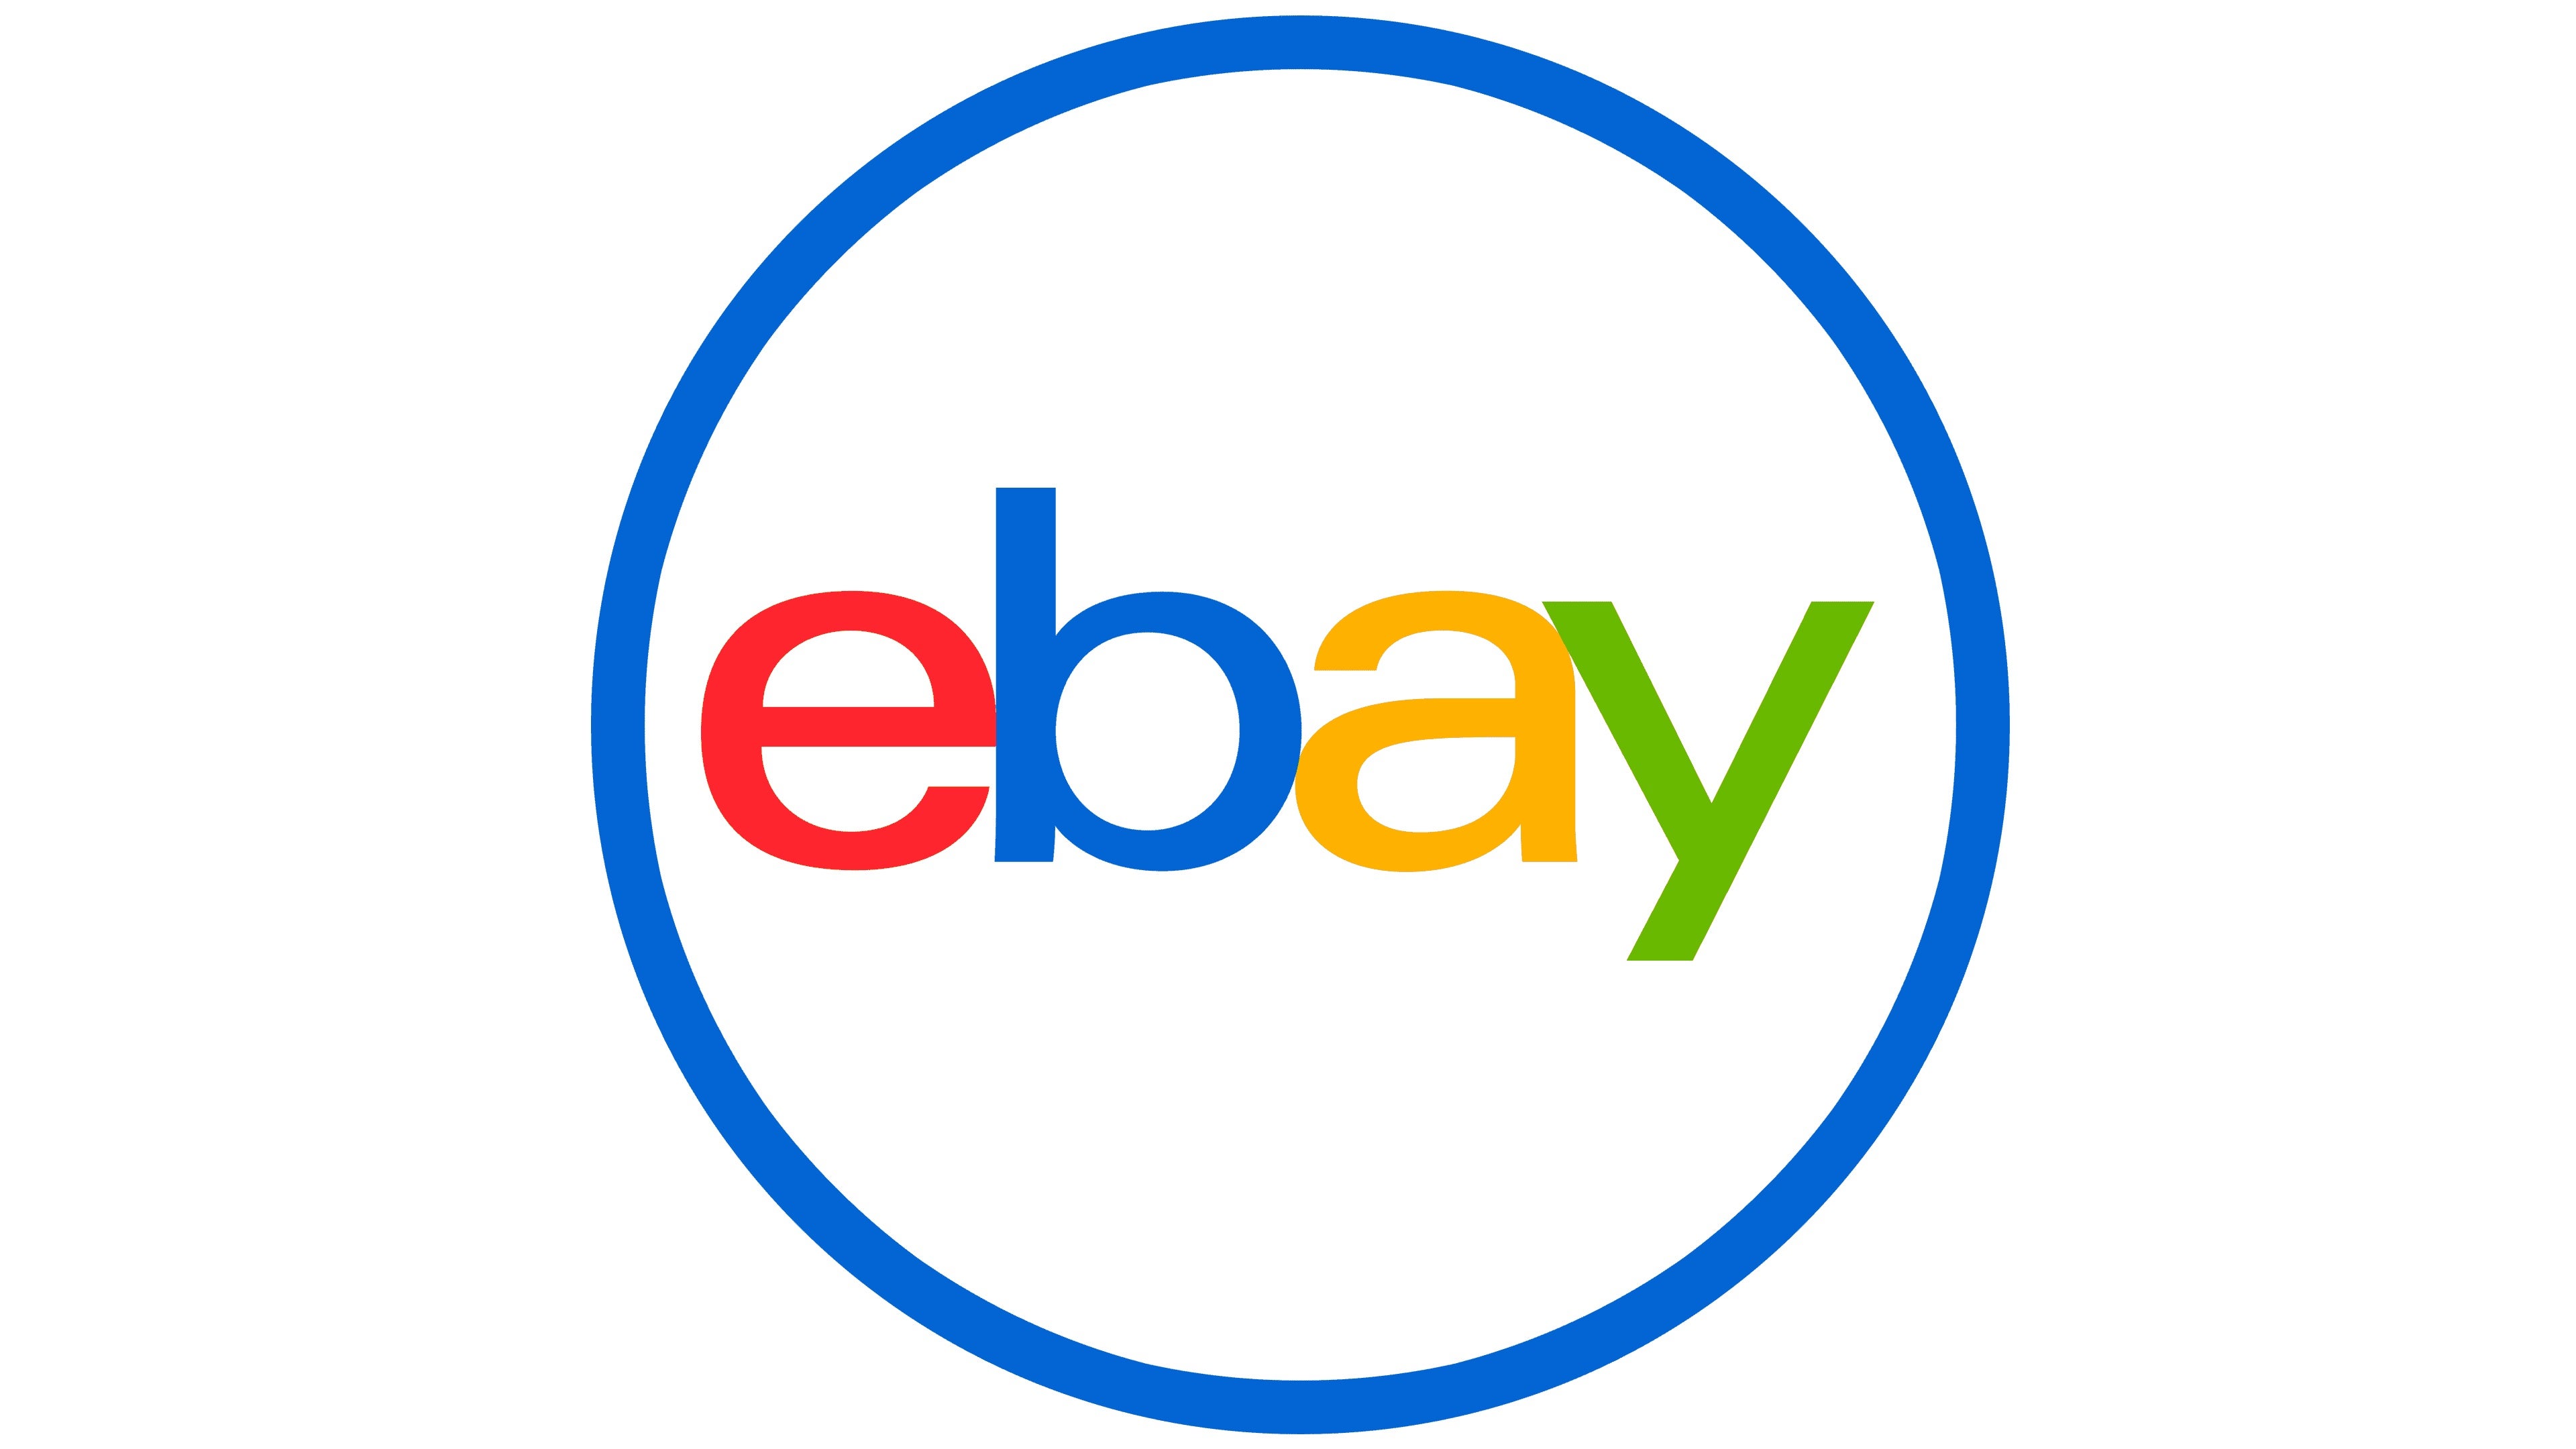 3 eBay Analysts Express Concern On Q4 Outlook, Long-Haul Recovery: Here's Why